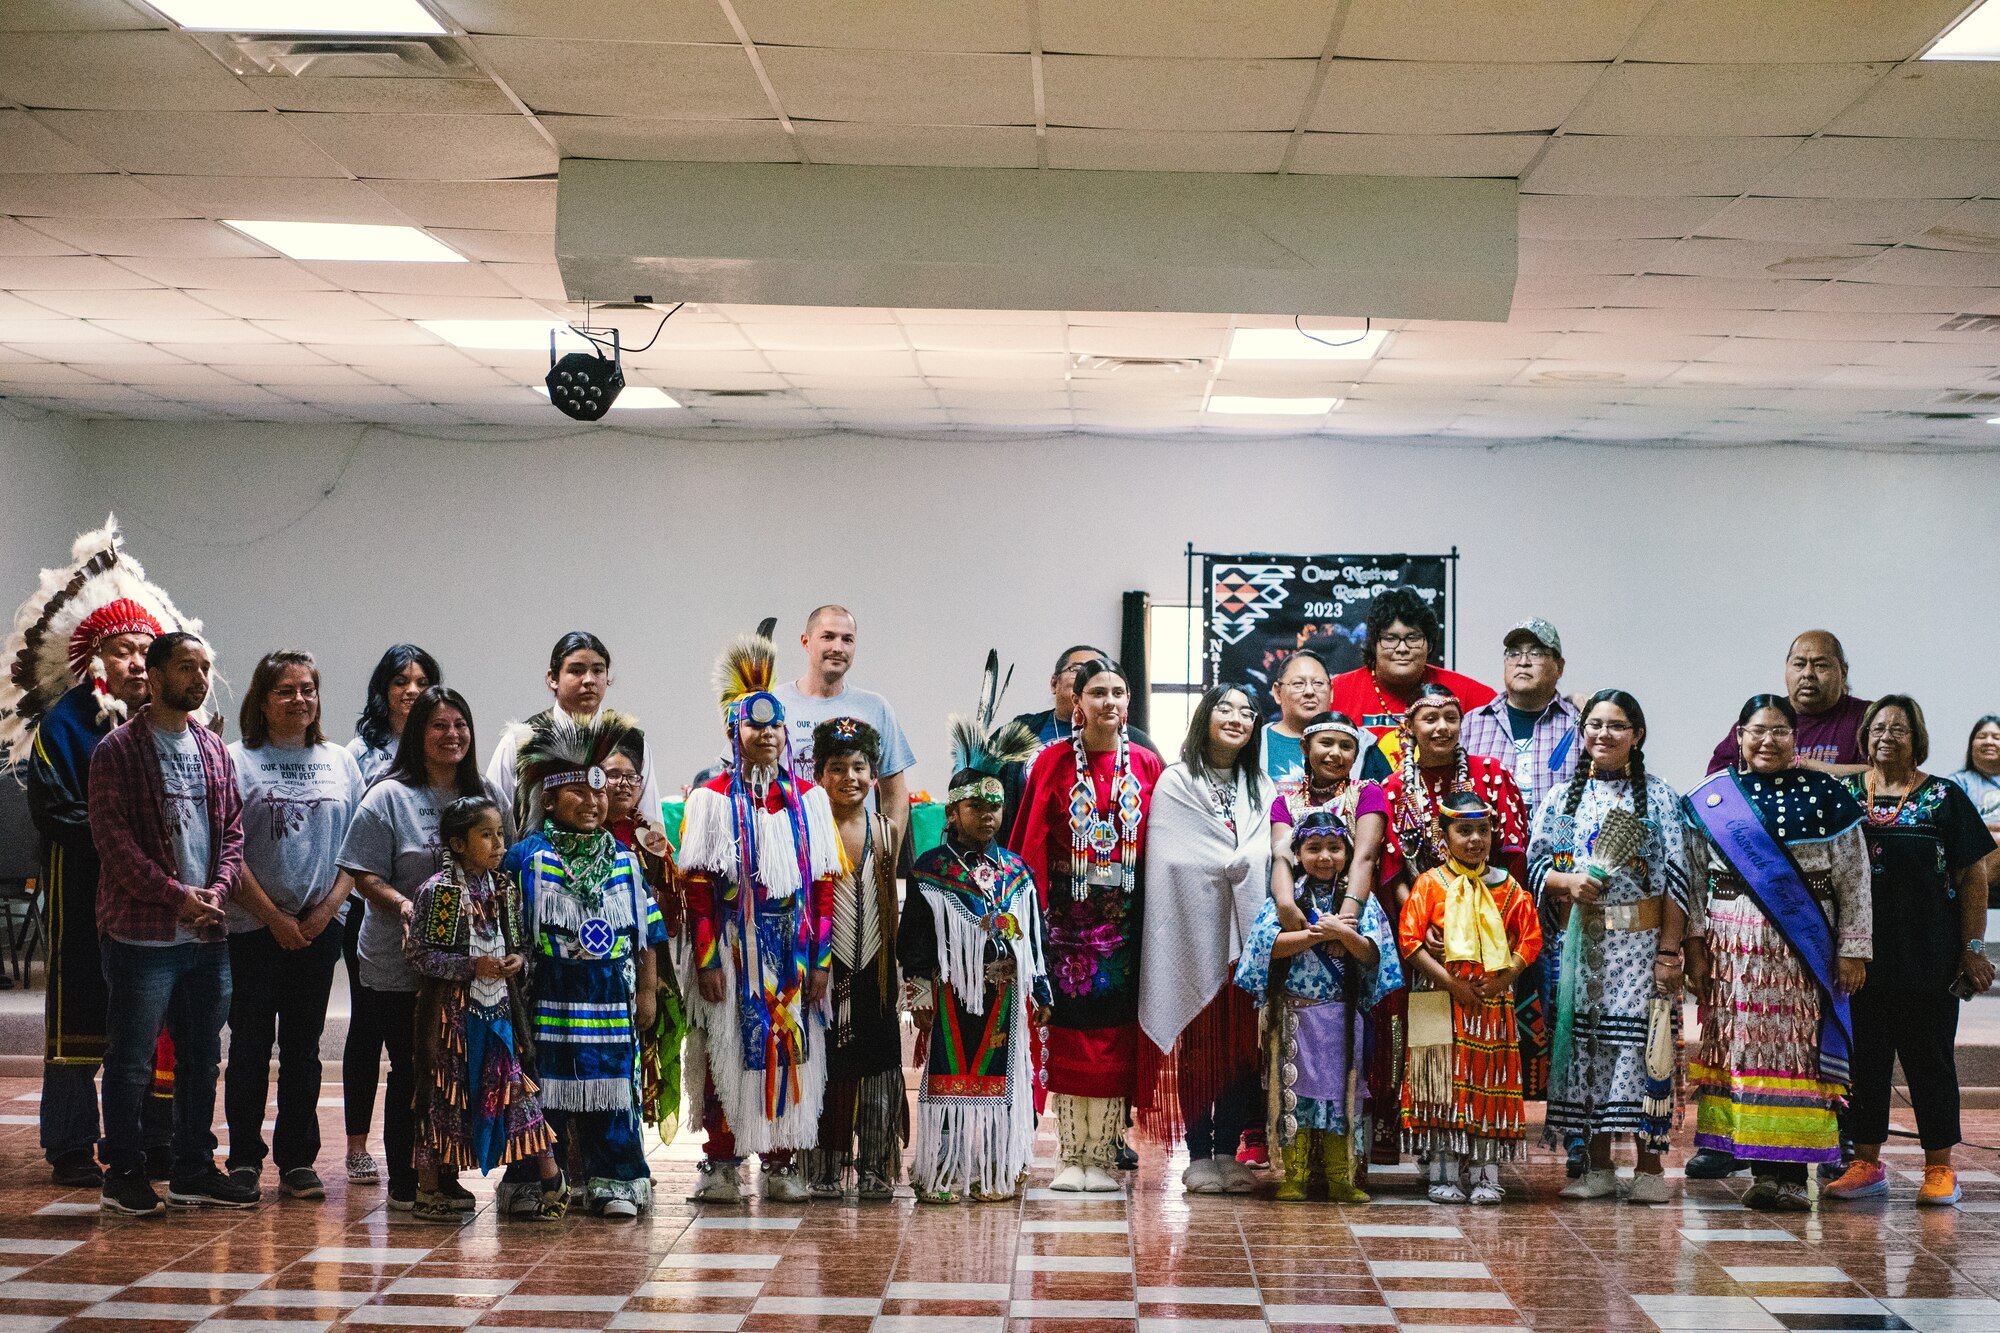 Native American members of the community pose for a photo during an intertribal event in Lonewolf, Oklahoma, Nov. 18, 2023. The event featured art, beading, music, and dancing in celebration of Native American Indian Heritage Month. (U.S. Air Force photo by Airman 1st Class Shae Herrera)